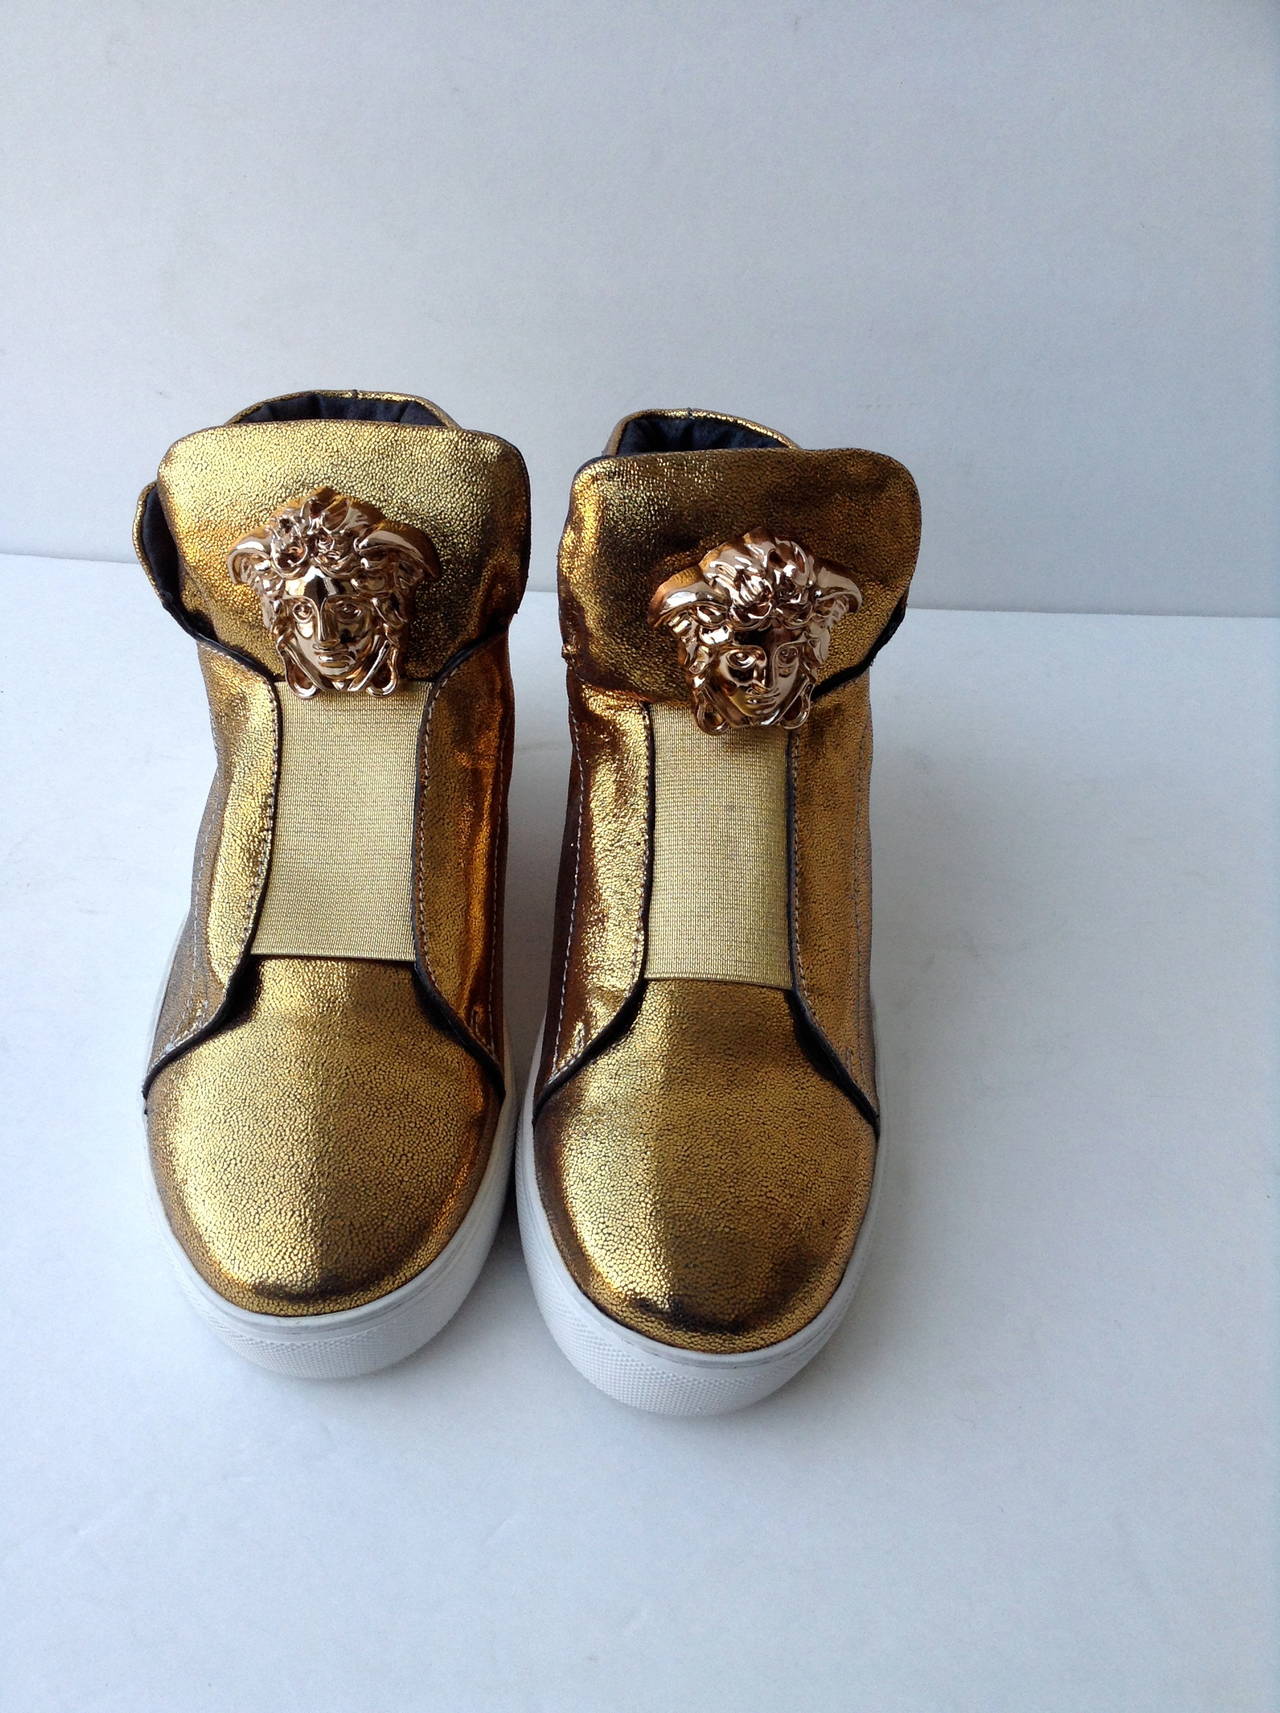 Palazzo Hi-Top Sneaker
Gold leather
Featuring Iconic Medusa emblem on front
Made in Italy

comes as is no box
men's size 43